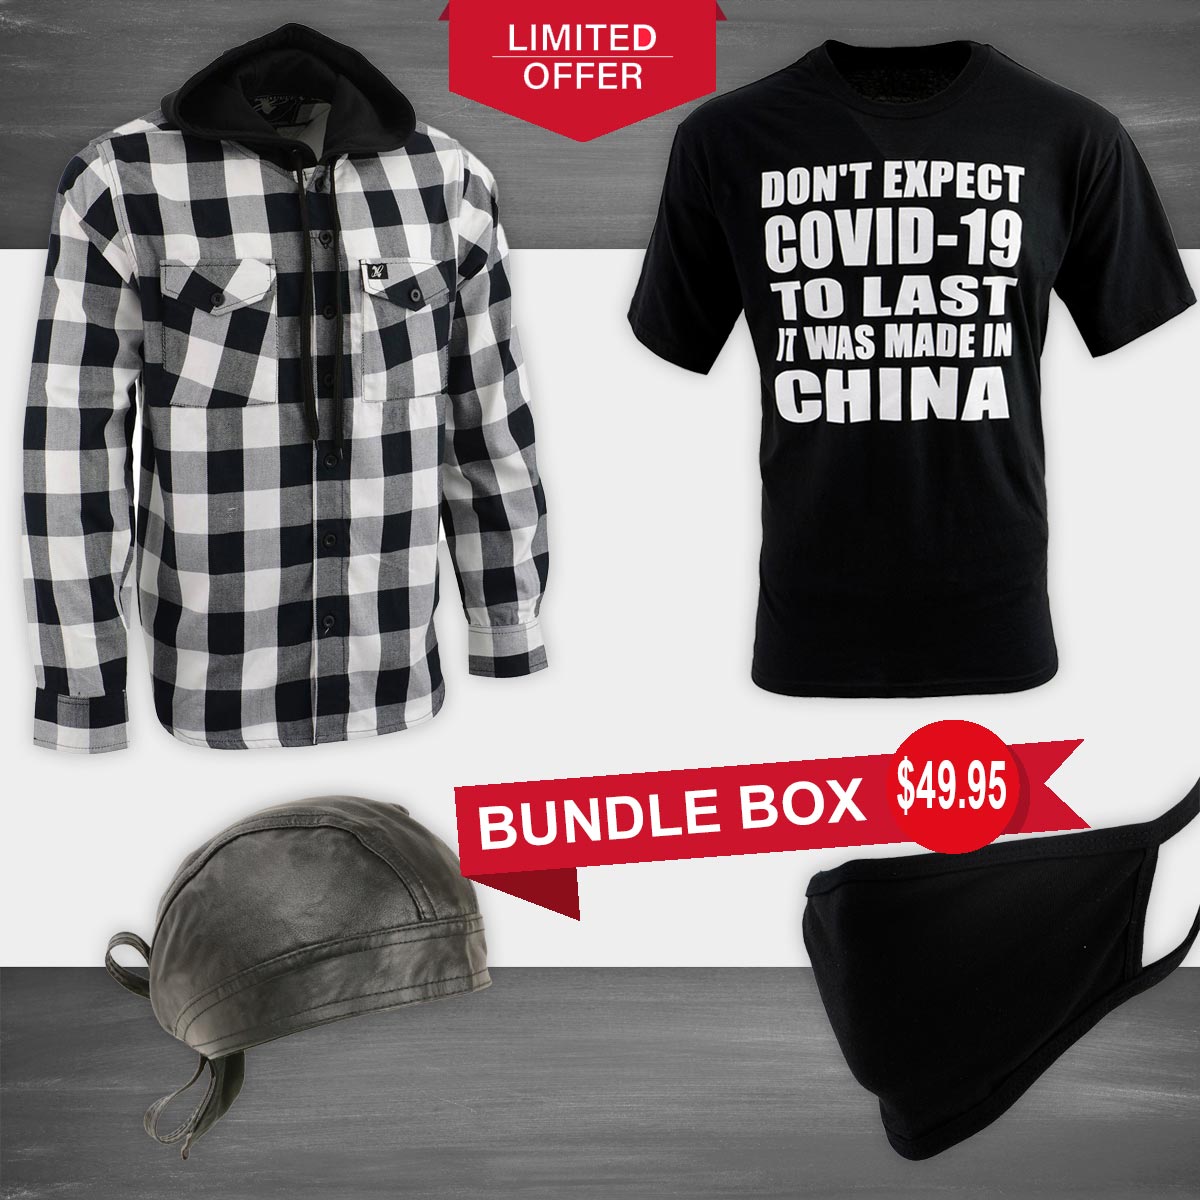 Men’s Box-2 Bundle Pack with Flannel Hoodie, Printed T-Shirt, Skull Cap and Face Mask